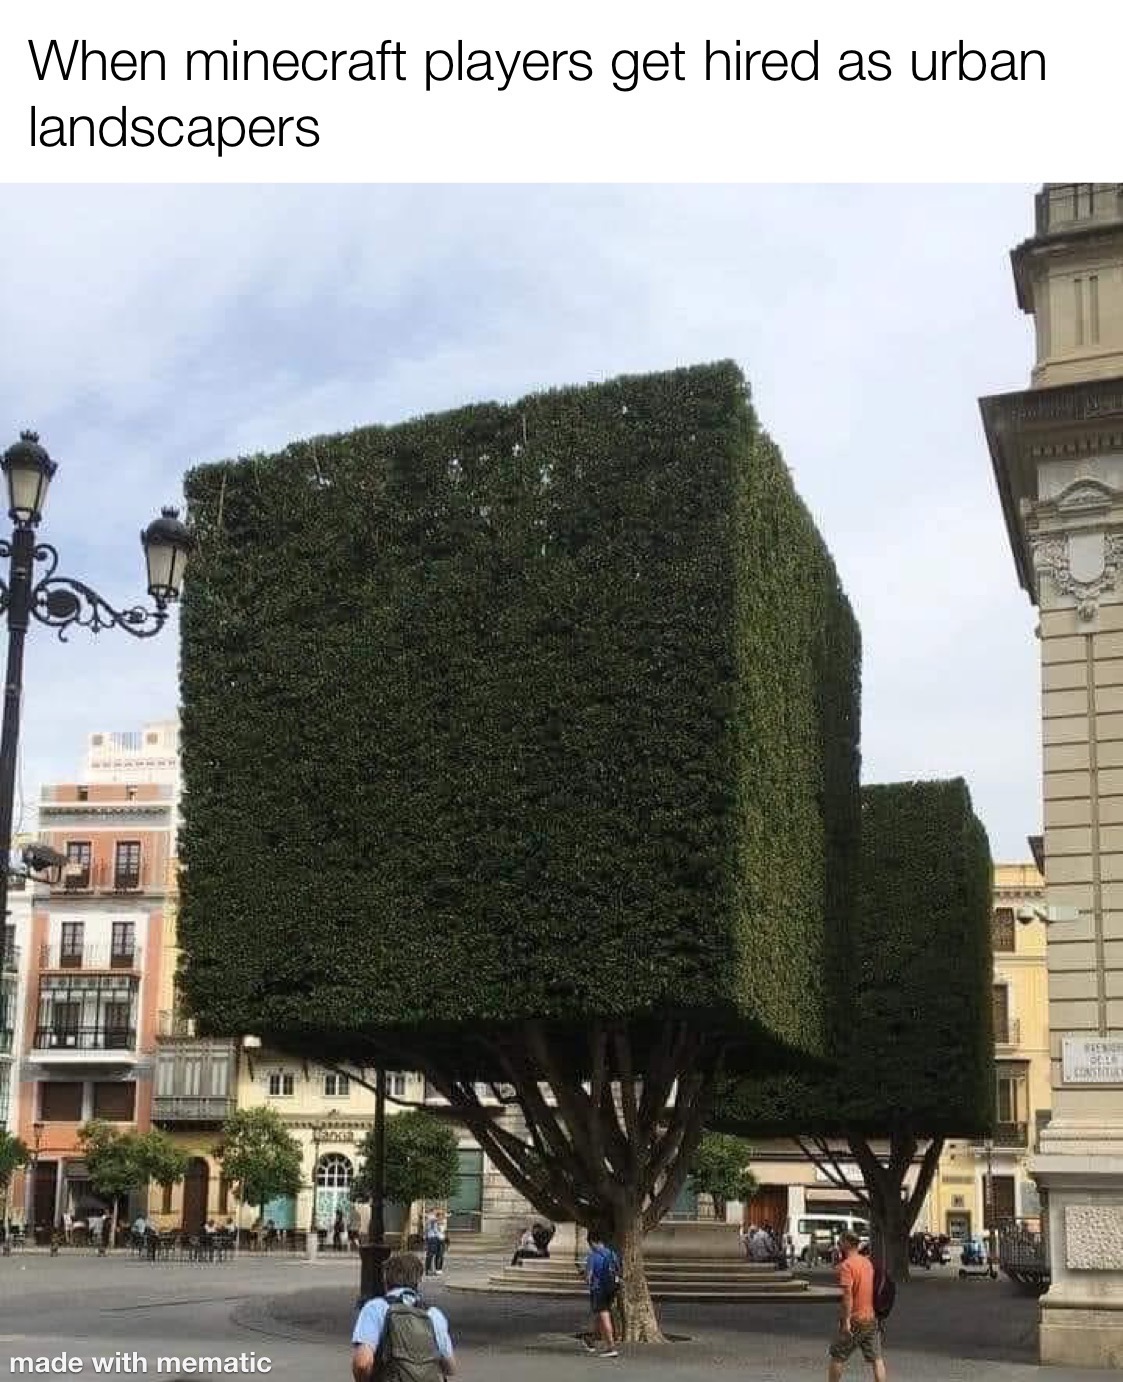 funny memes and tweets - Photograph - When minecraft players get hired as urban landscapers Ti made with mematic Reenioh Cal Constituat